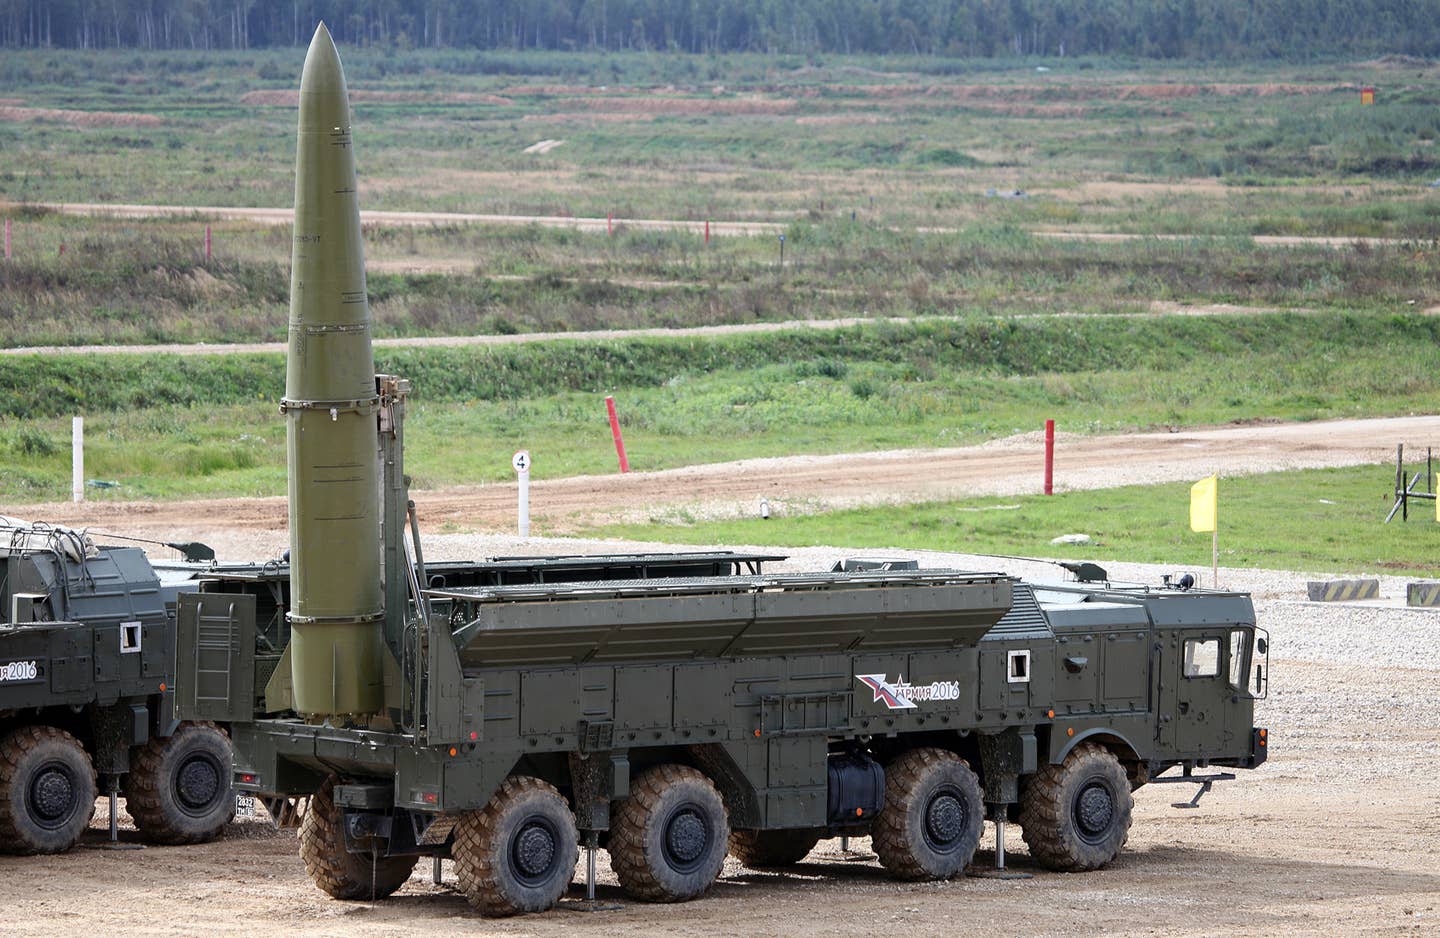 Russia's Iskander-M short-range ballistic missile can carry a nuclear or a conventional warhead and is among the country's available tactical nuclear weapons. <em>Vitaly Kuzmin via Wikimedia</em>